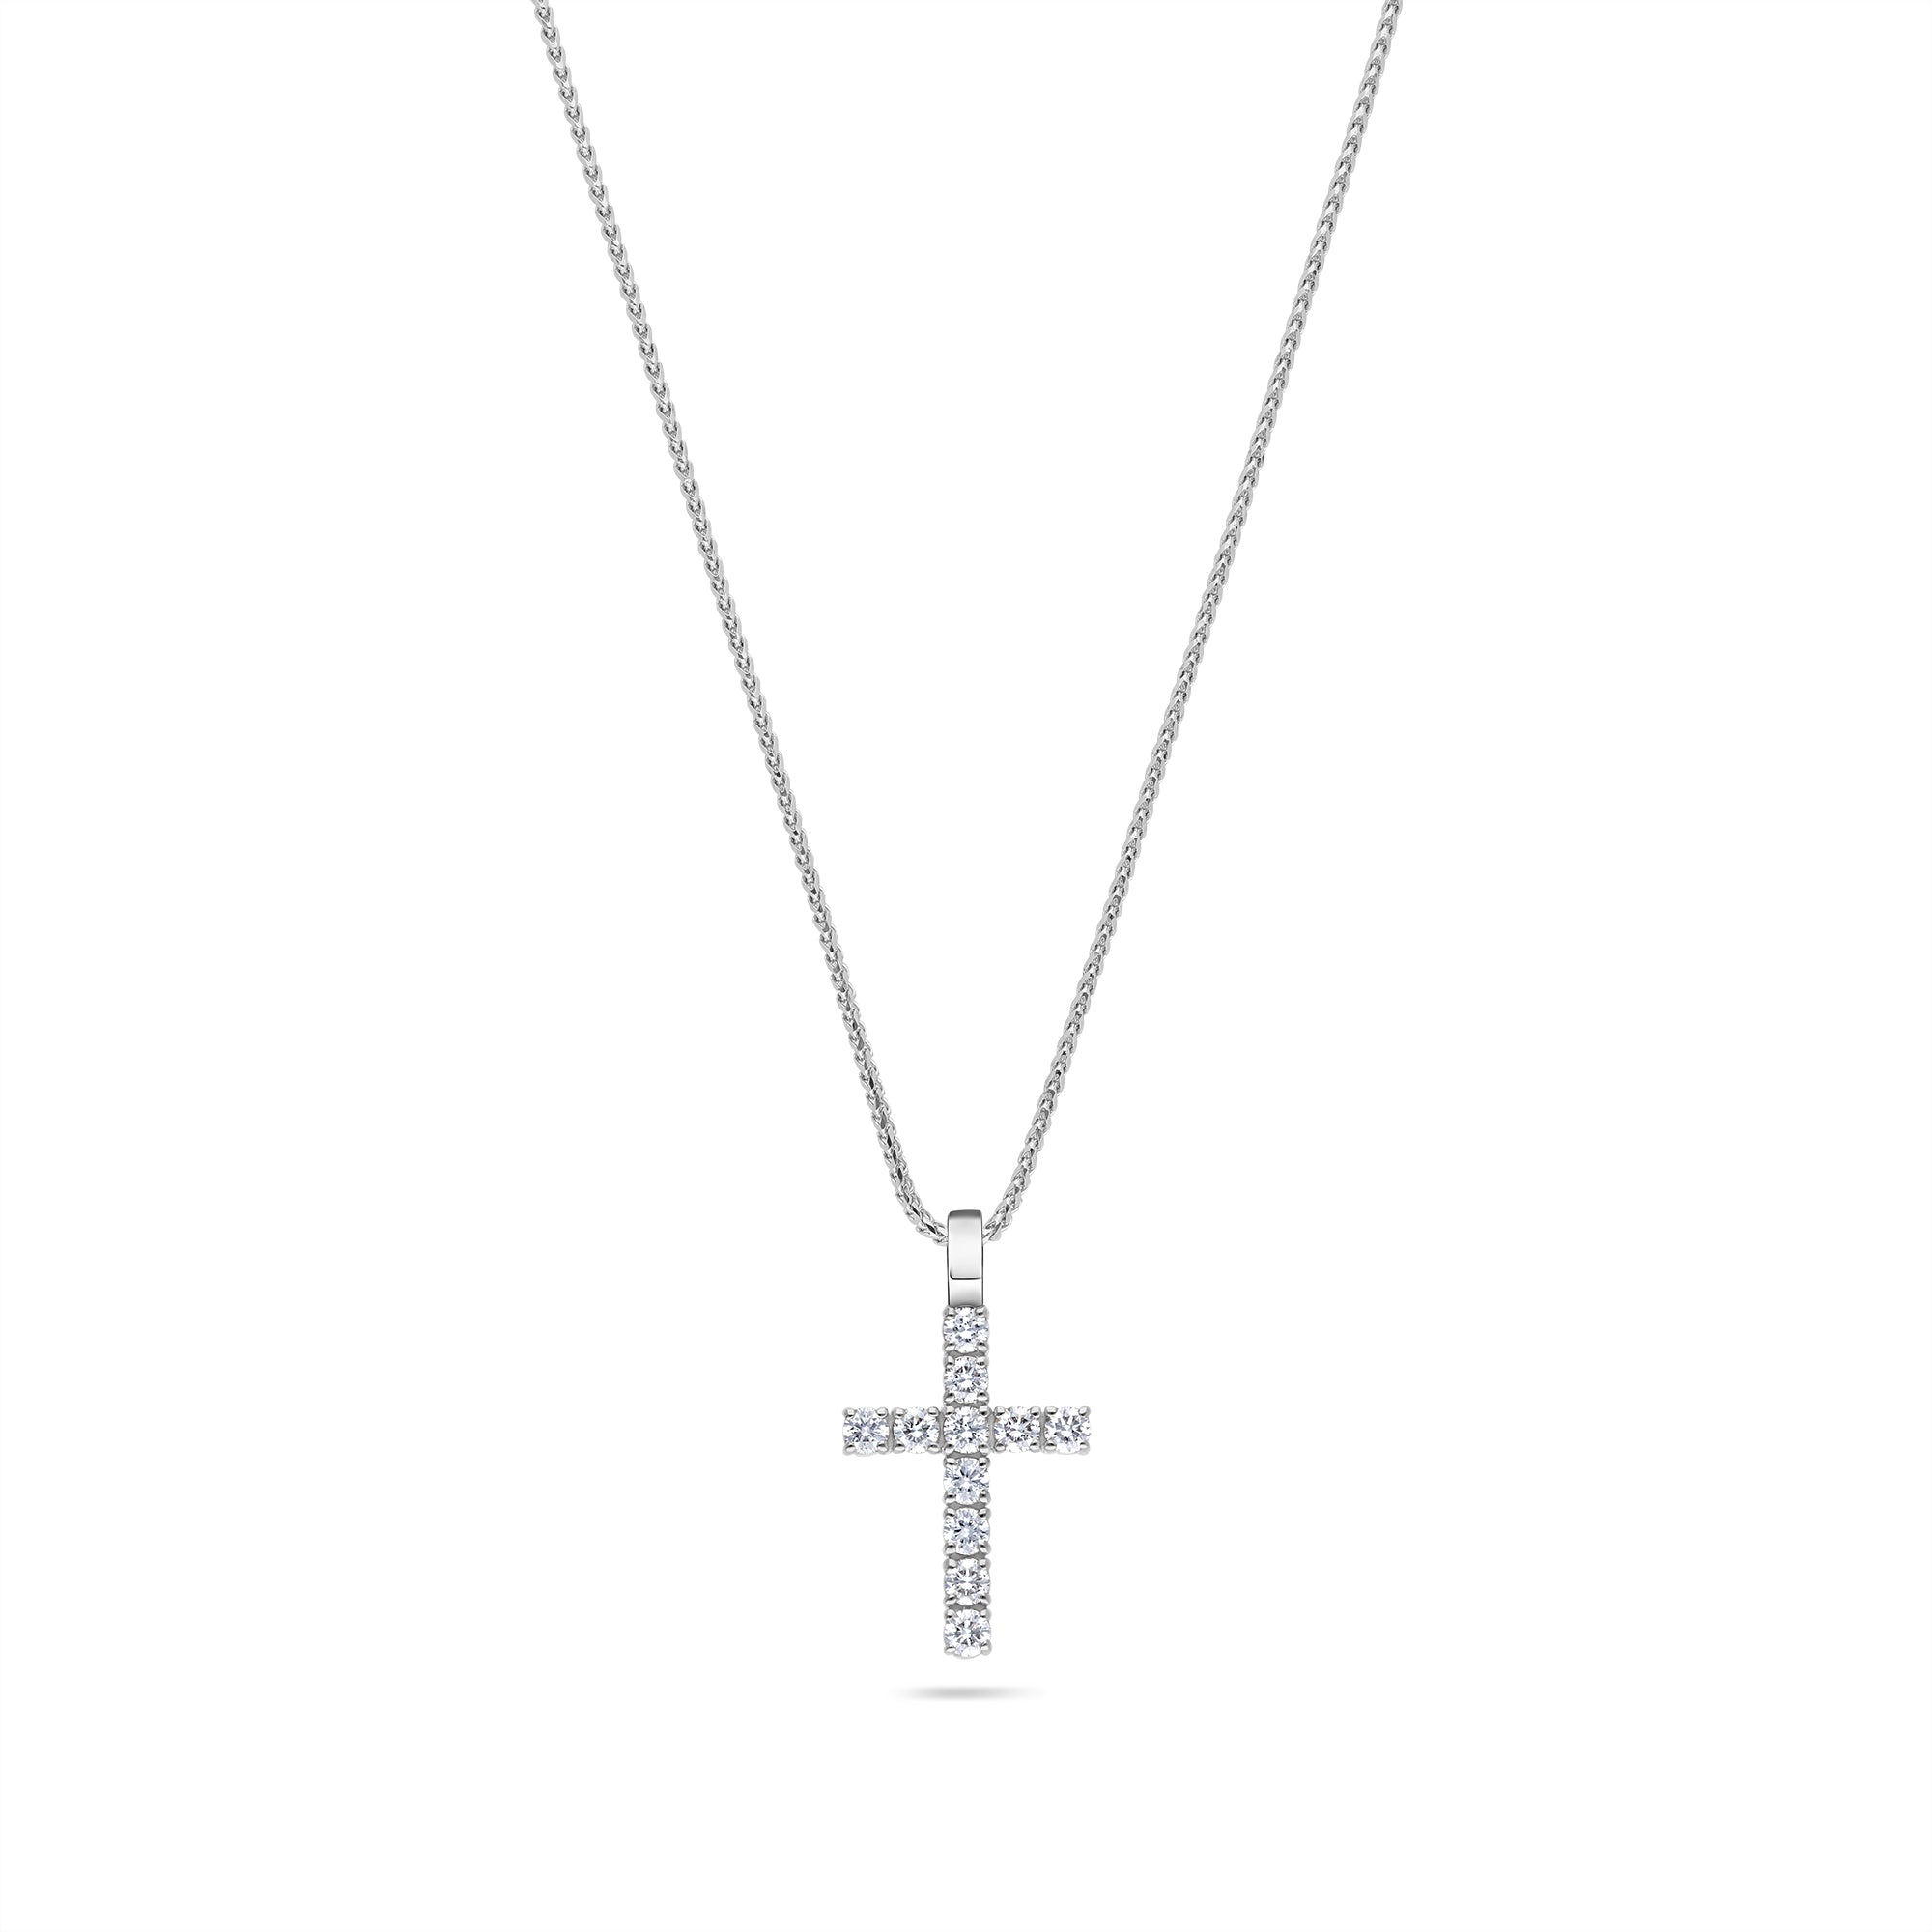 Necklaces Shining Diamond Stone Pendant Cross Pendants Necklace Jewelry  Platinum Plated Men Women Lover Gift Couple Religious Jewelry From Wsy33,  $28.44 | DHgate.Com